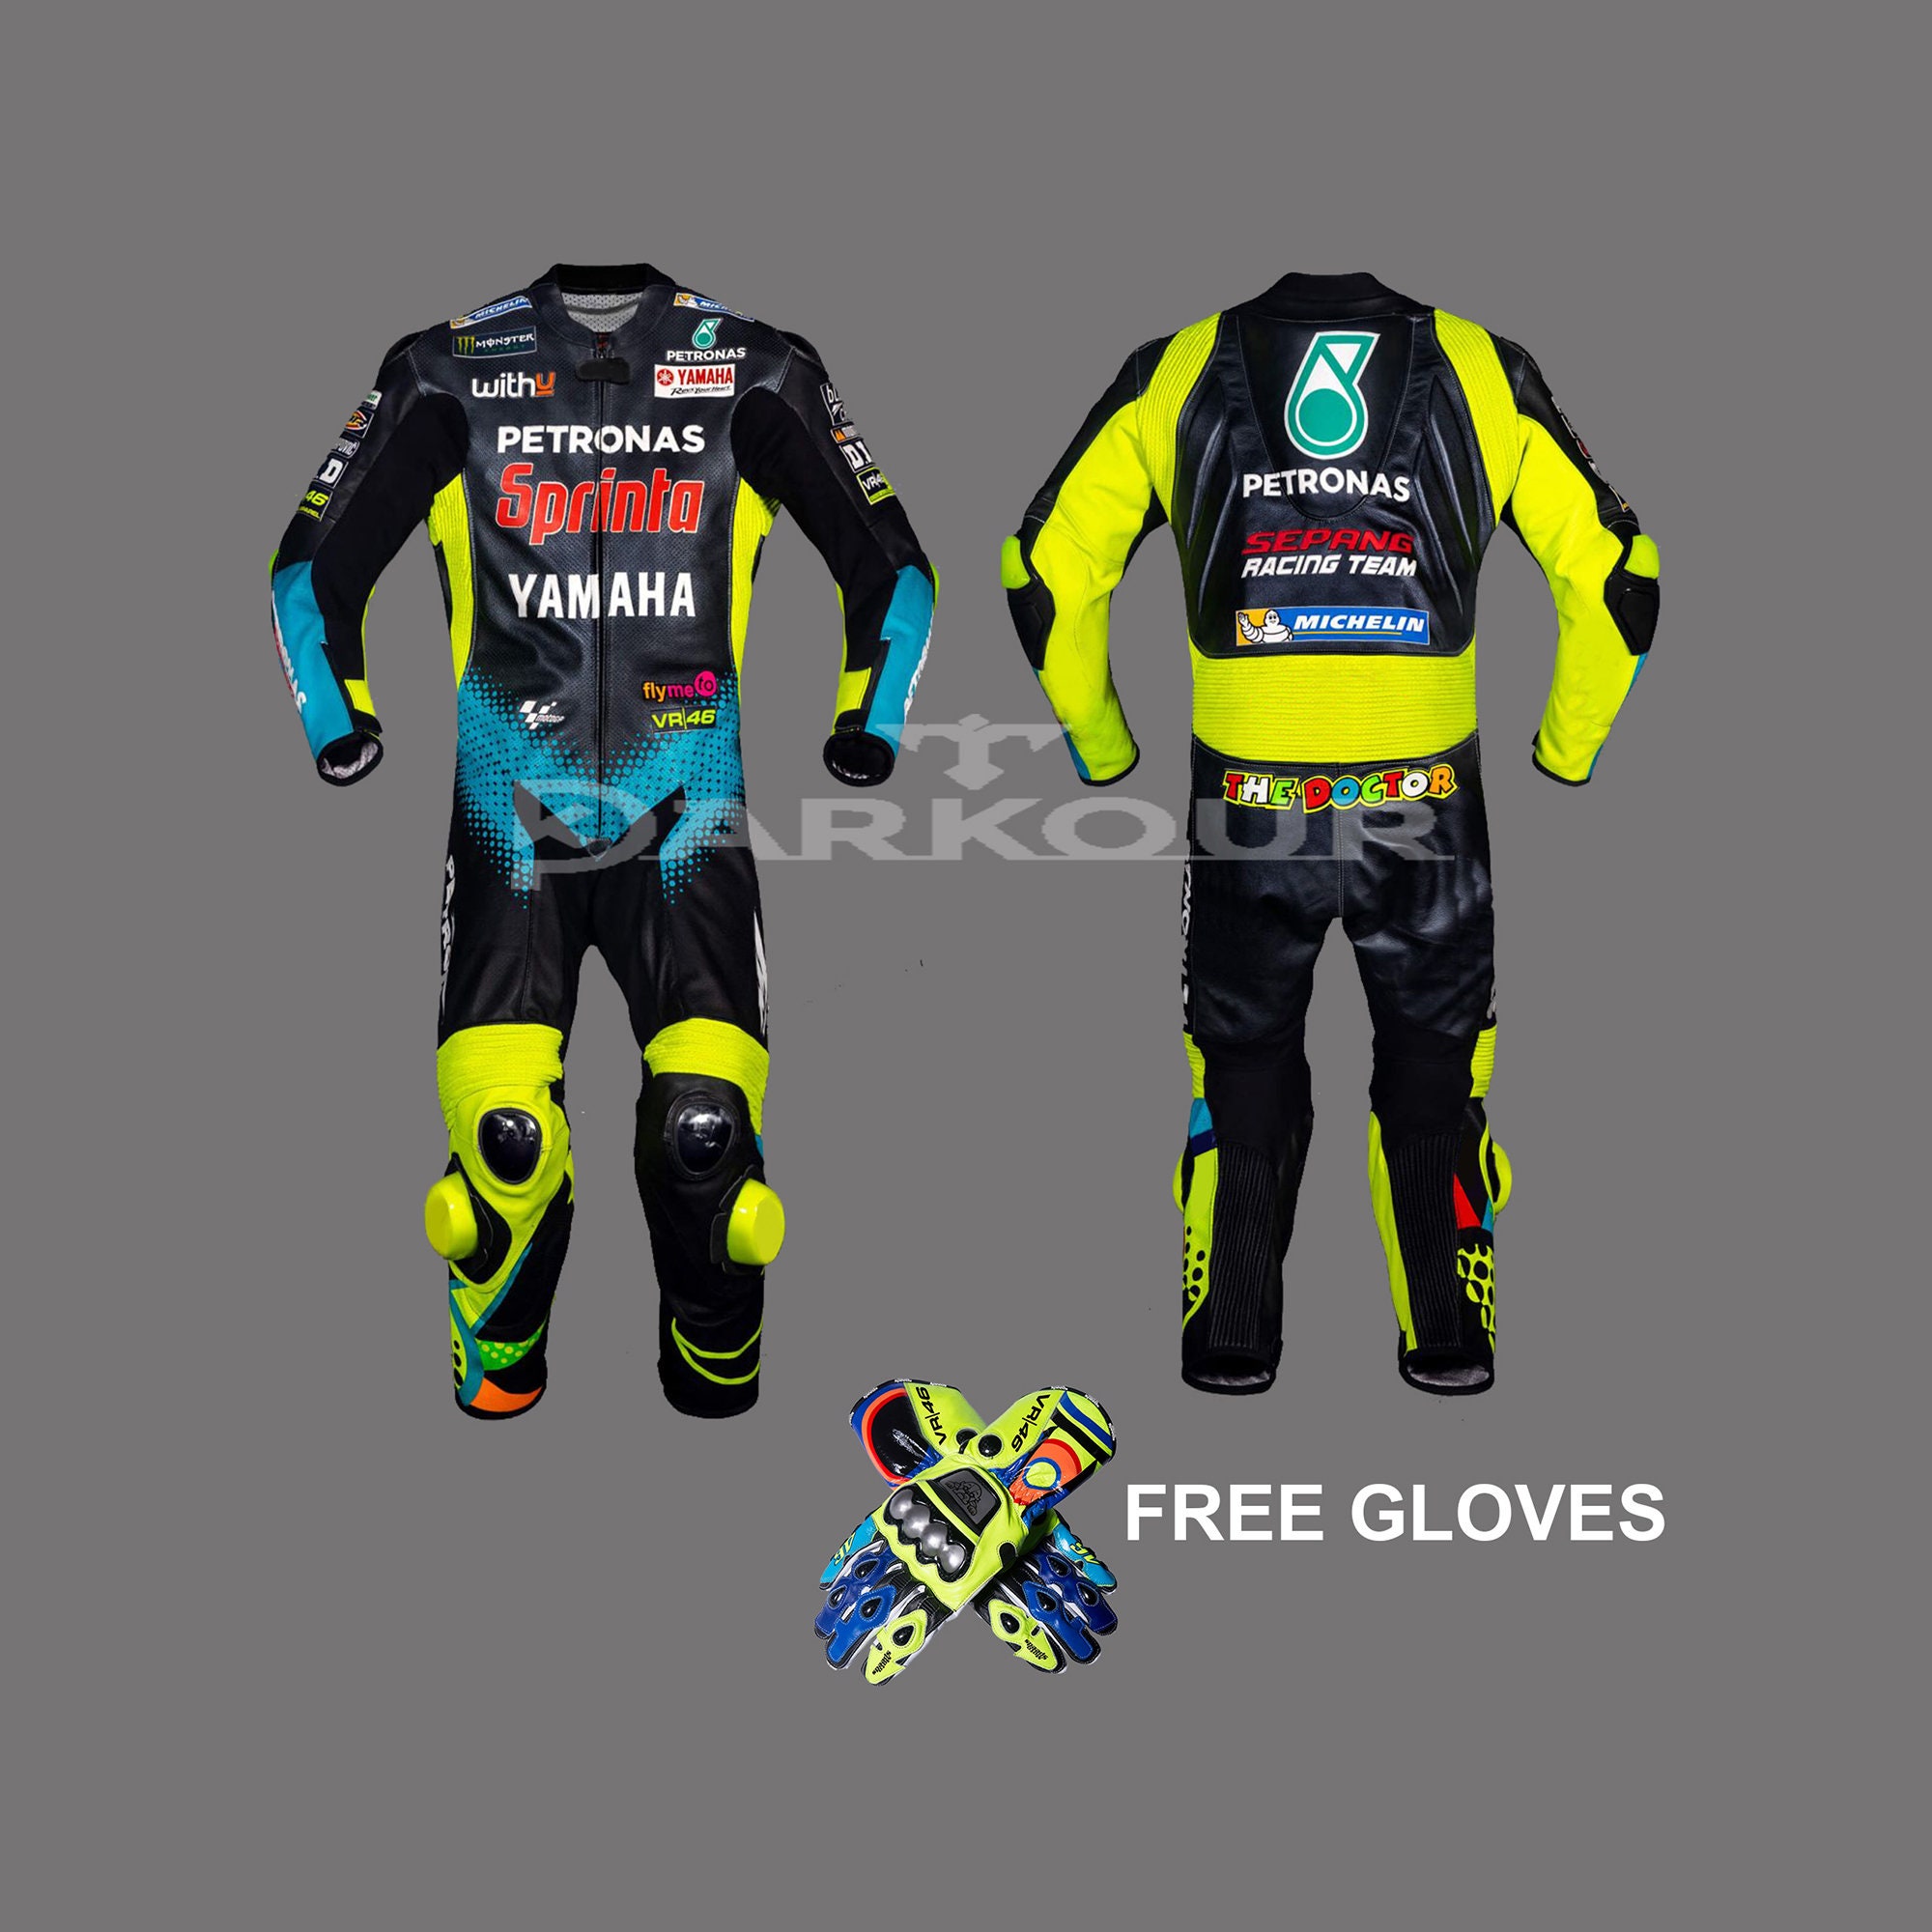 Custom Beginner Auto Racing Suit - Affordable & Safe Entry-Level